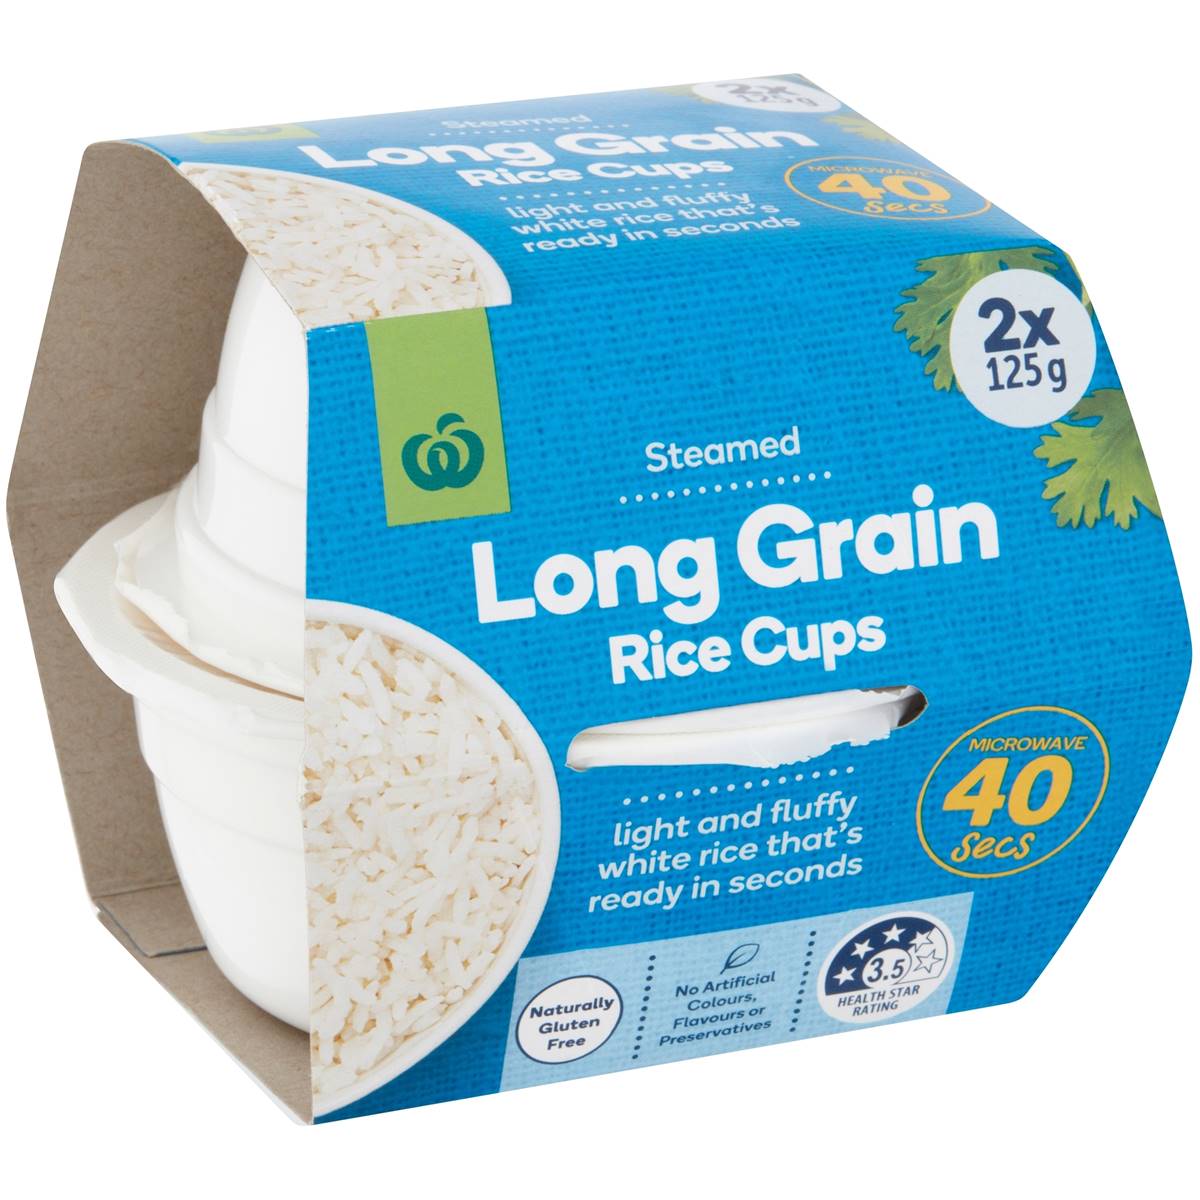 Woolworths Long Grain Rice Microwave Cups 2 Pack is not halal, gluten-free